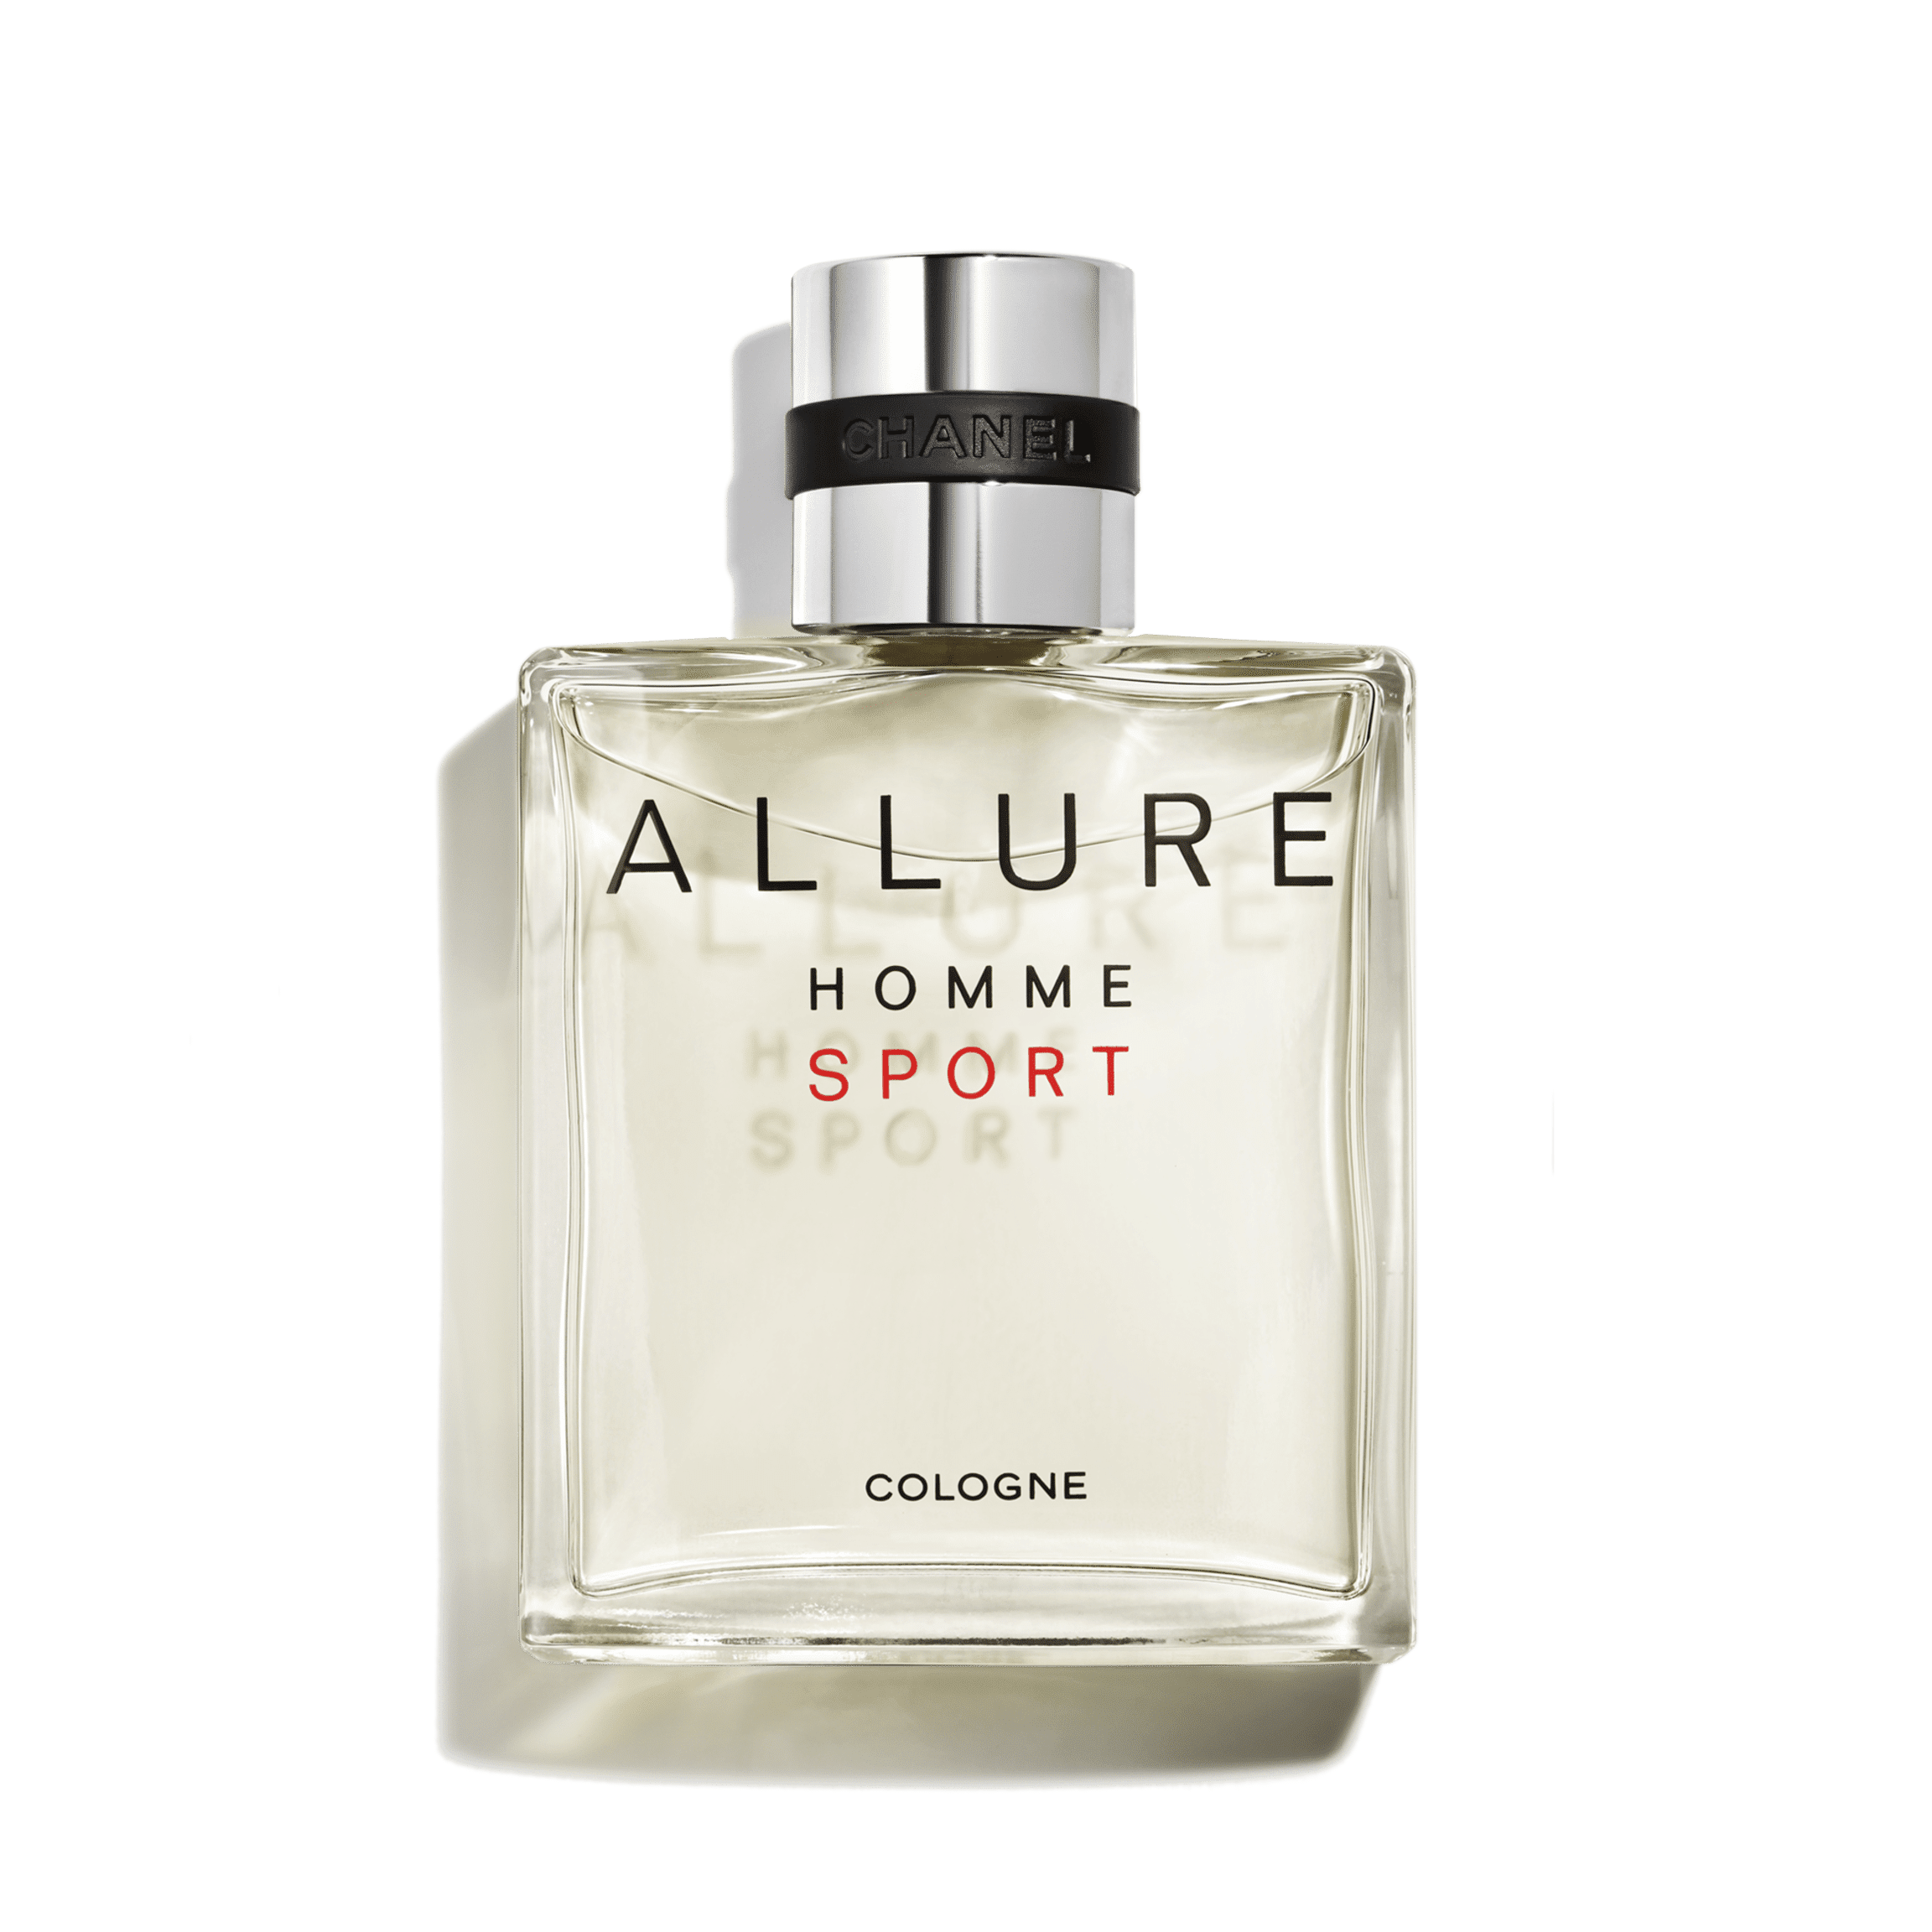  Vocal Performance M005 Eau de Parfum For Men Inspired by Allure  Homme Sport 2.5 FL. OZ. Perfume Vegan, Paraben & Phthalate Free Never  Tested on Animals : Beauty & Personal Care